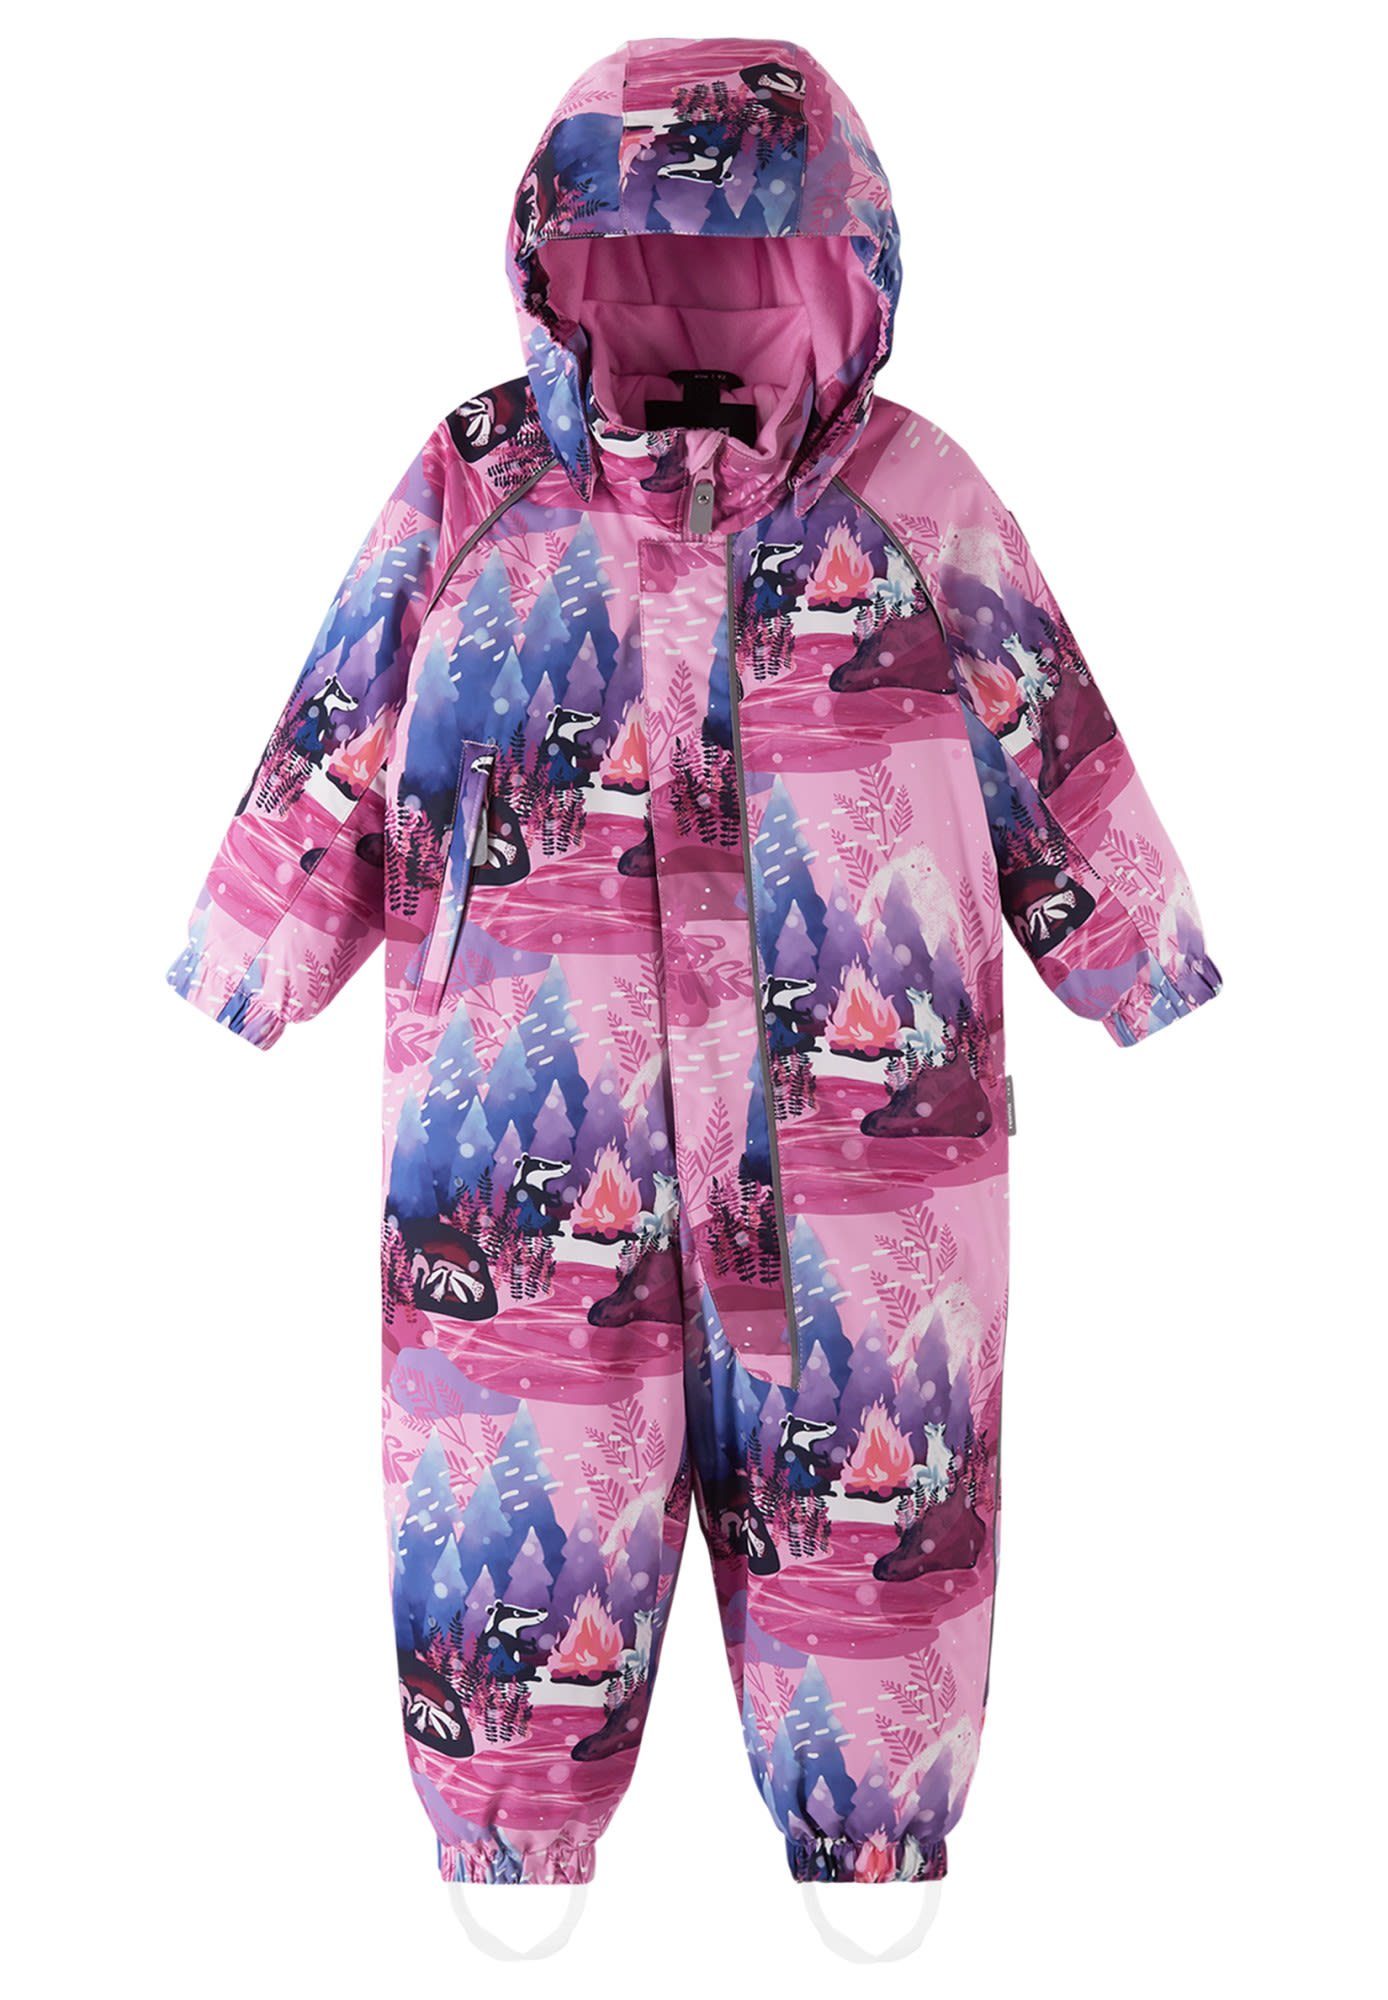 reima Overall Overall Pink Classic Toddlers Reima Winter Kinder Langnes